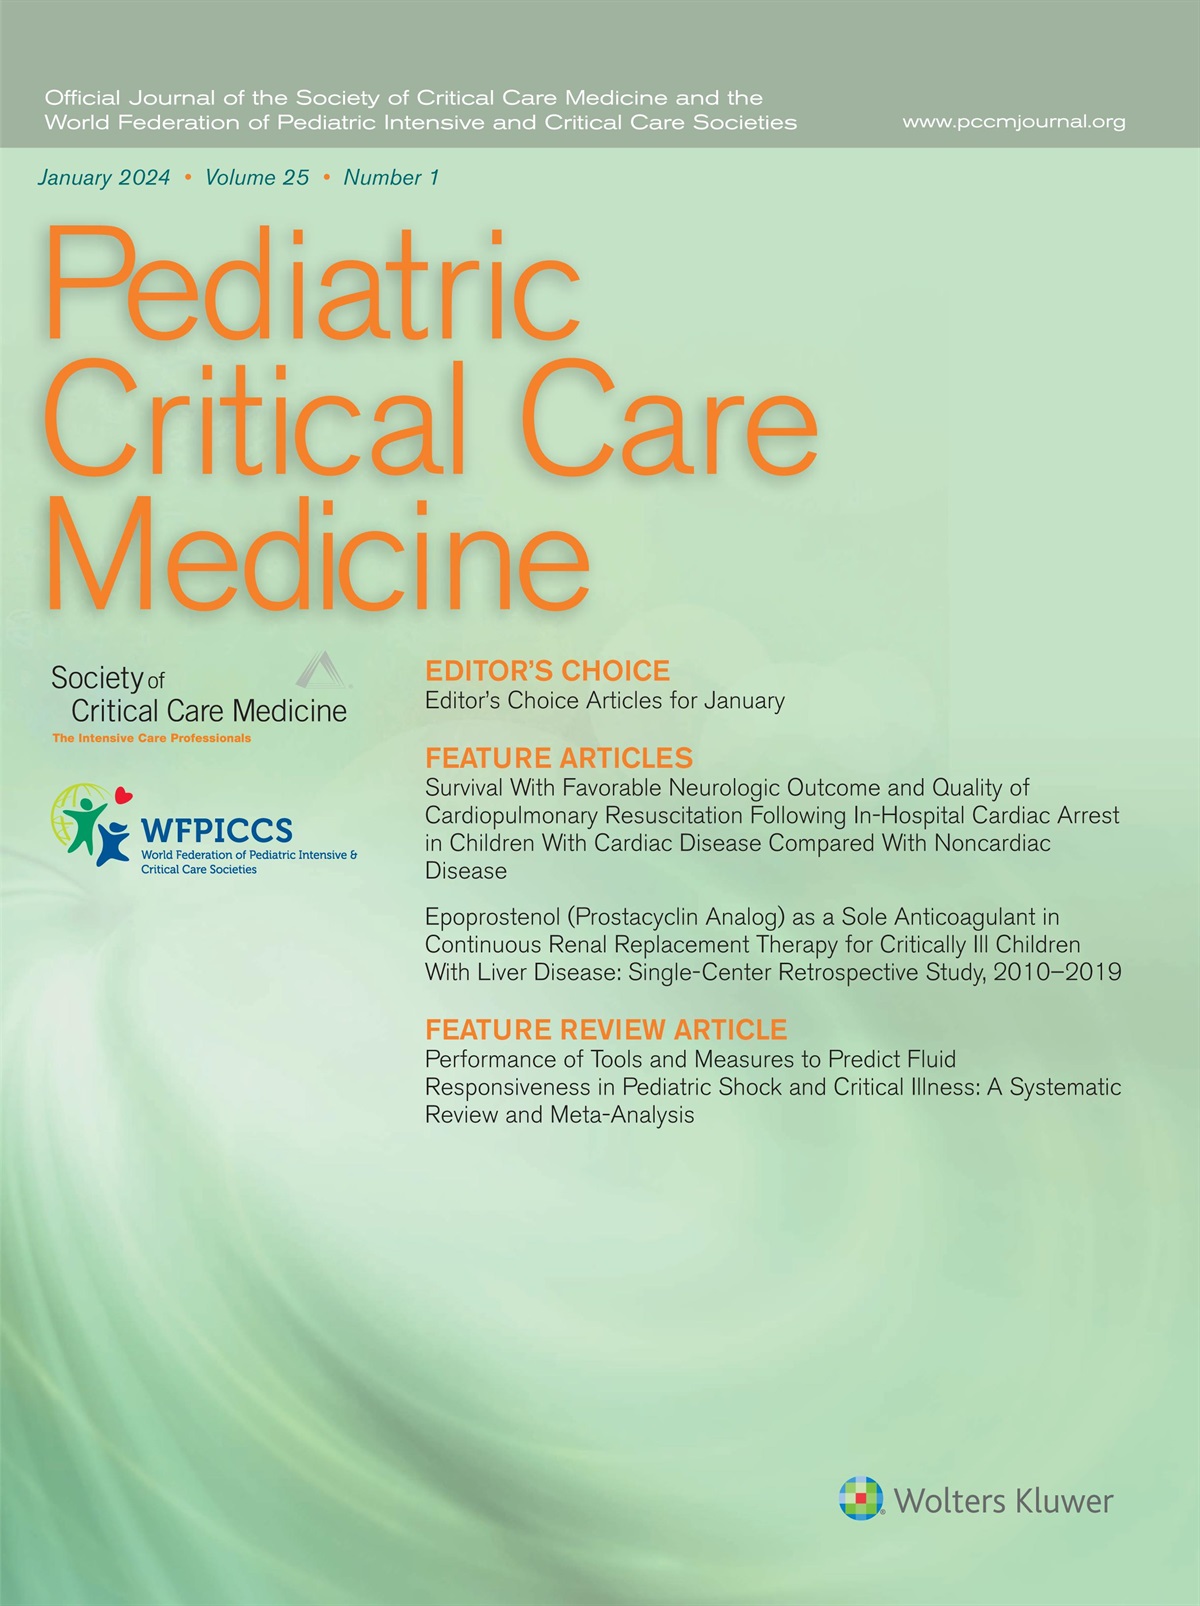 Predicting Fluid Responsiveness in Critically Ill Children: So Many Tools and So Few Answers*